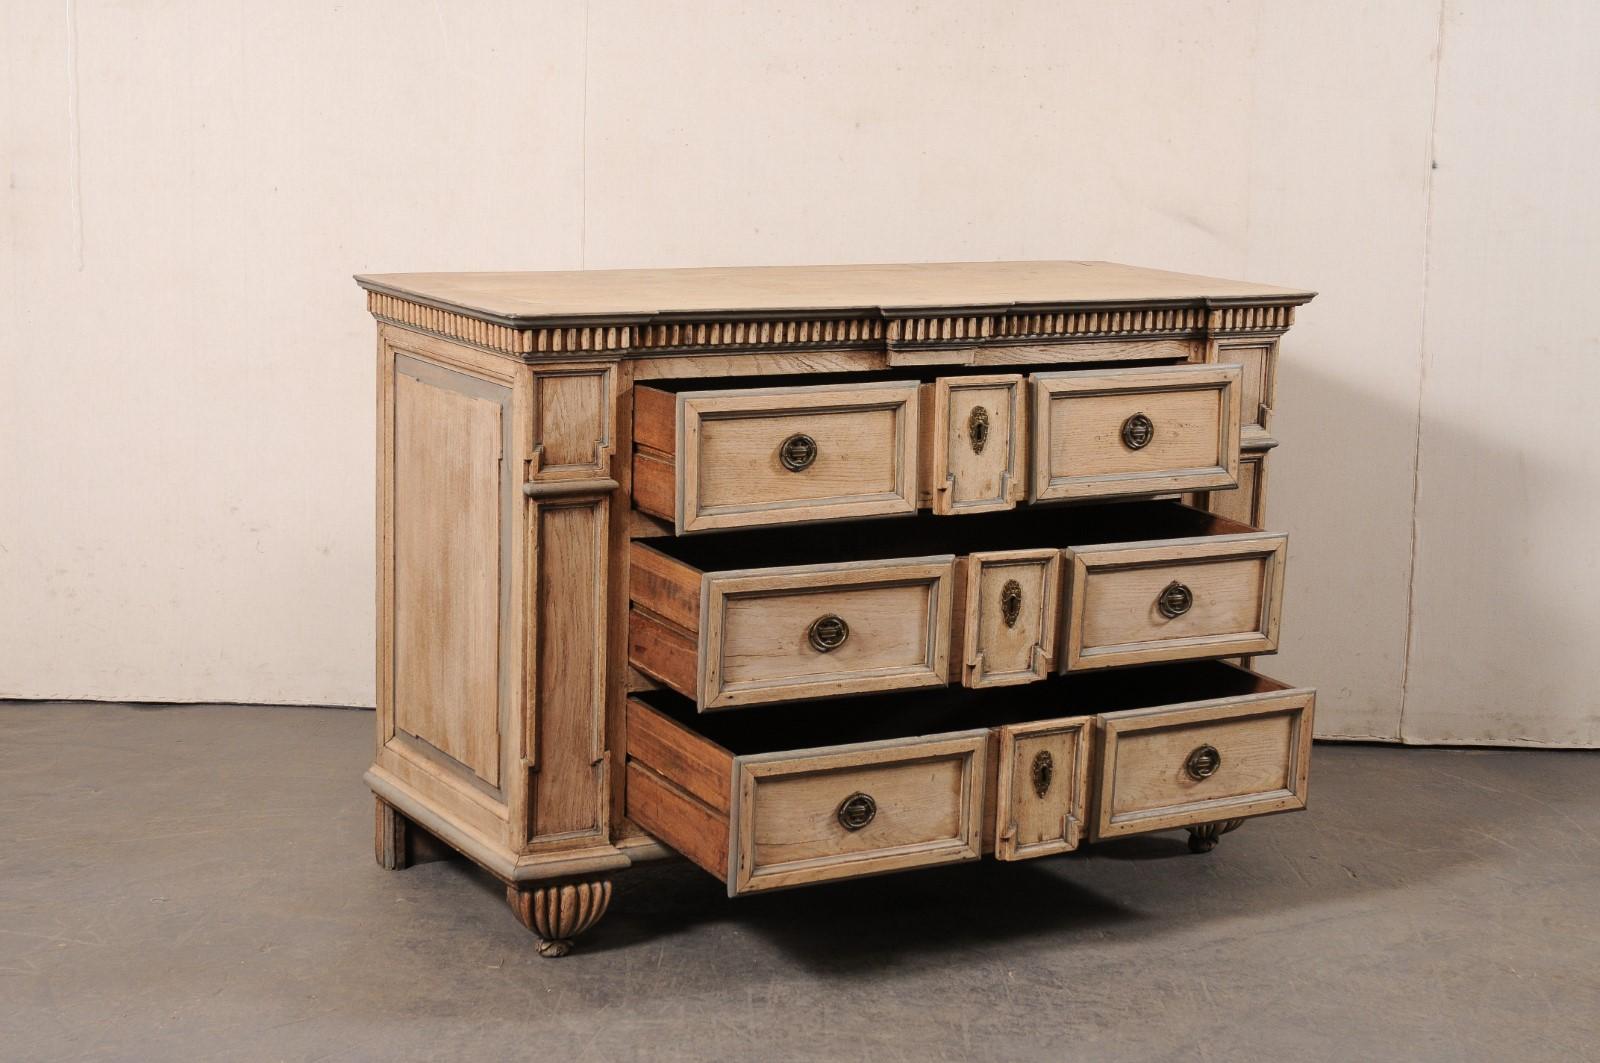 A fabulous Italian Tuscan carved-wood chest of drawers from the 18th century. This antique chest from Tuscany, Italy features a subtle break-front design along its front, with a nice dentil molding accentuating the underside of the top on three